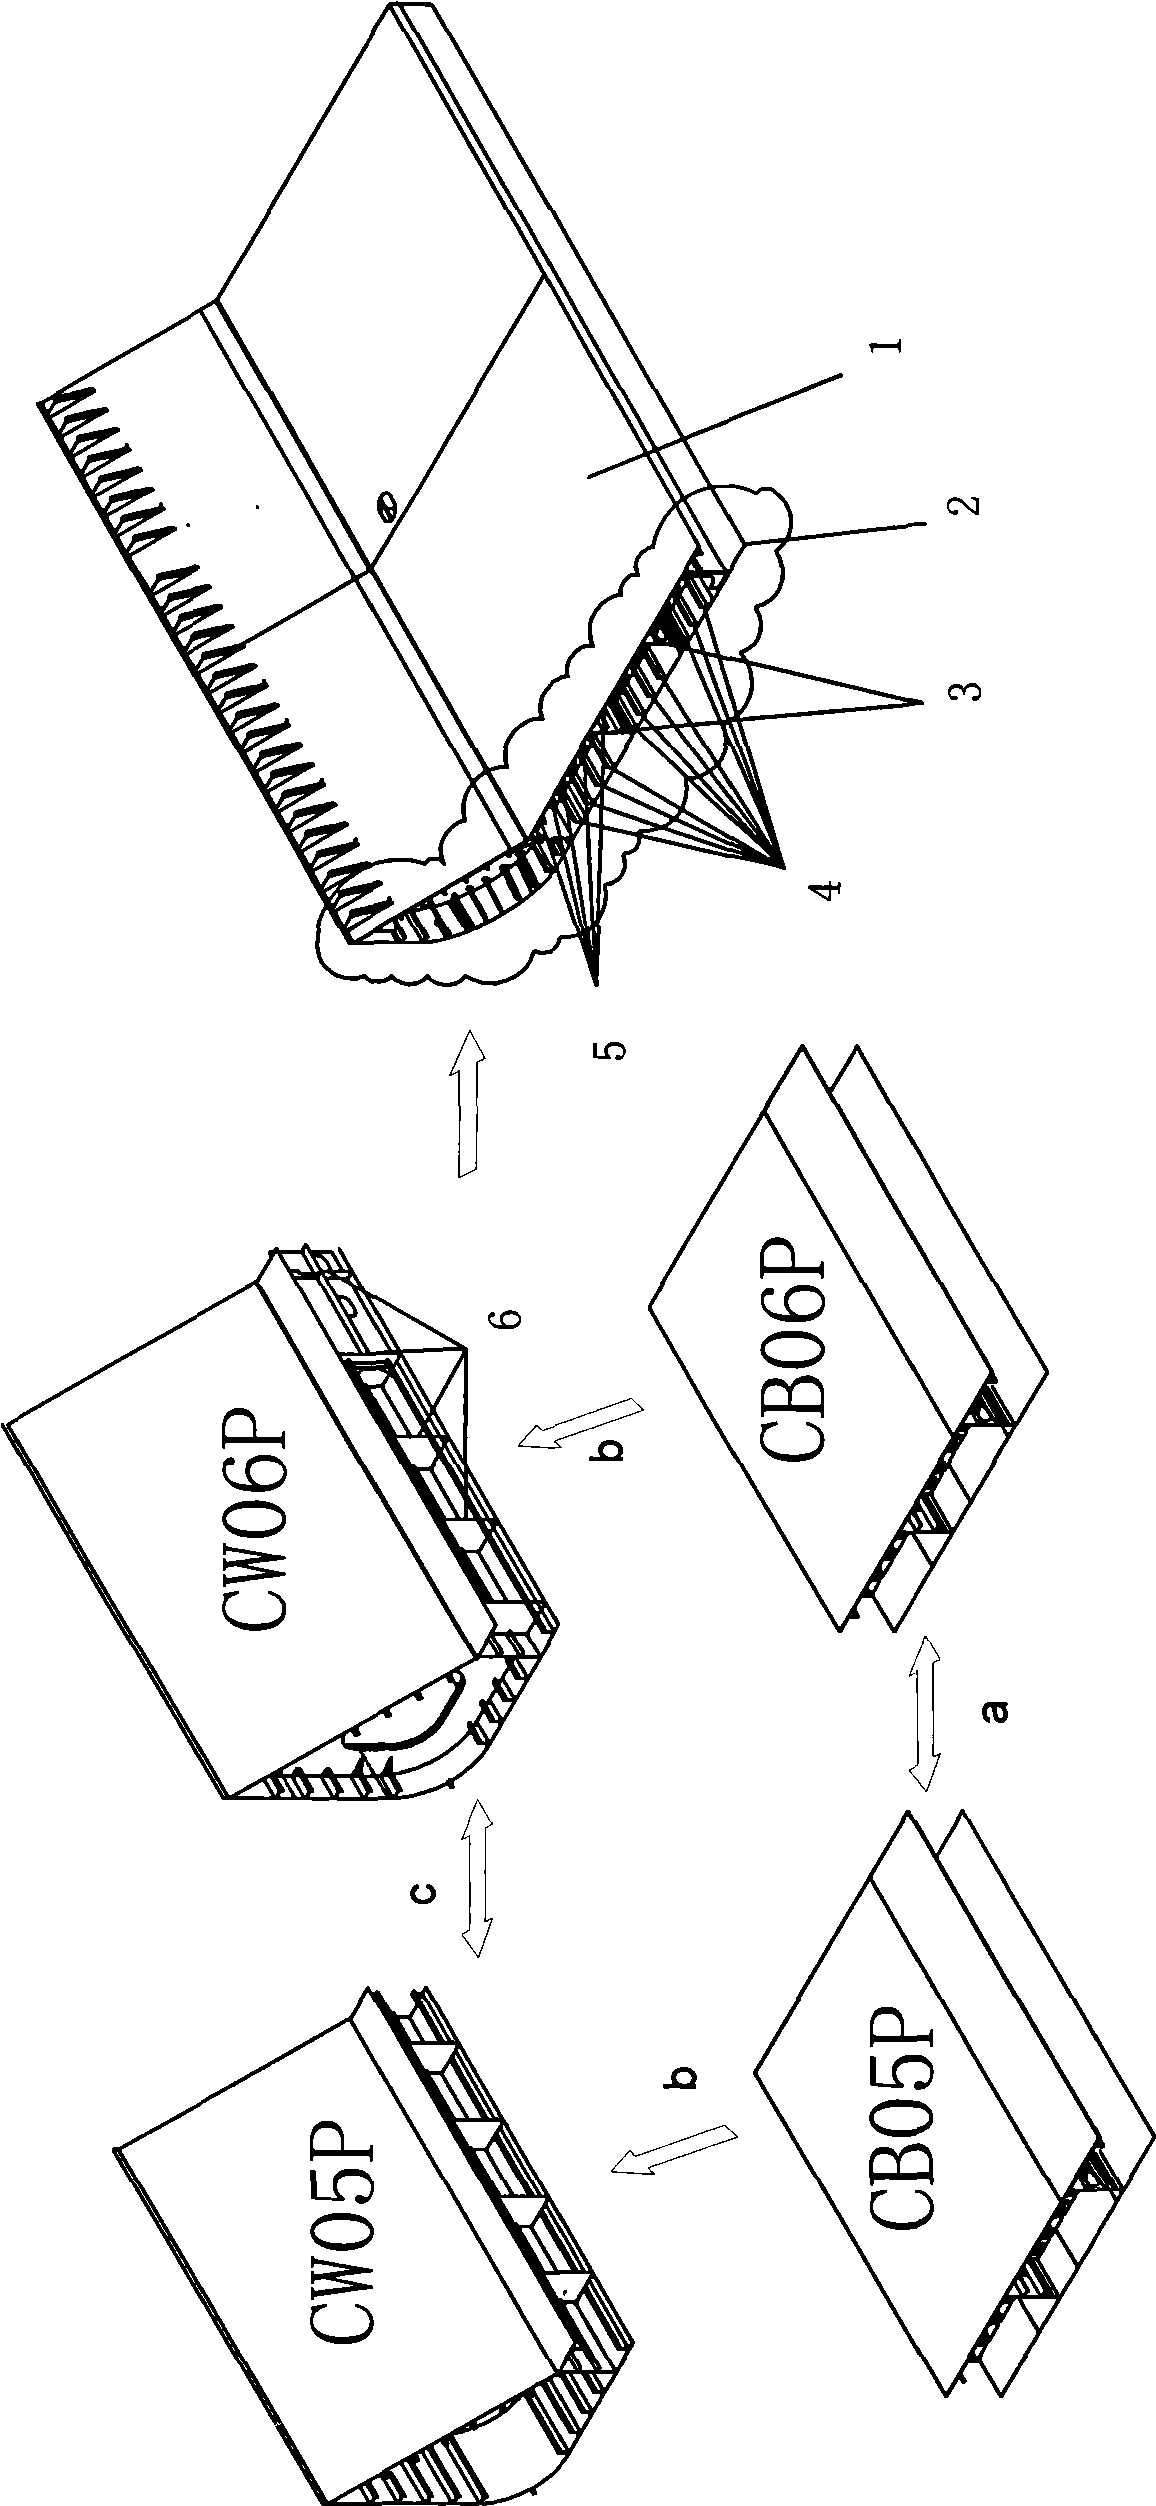 Method for half-breadth double-span total assembling and building in shipbuilding